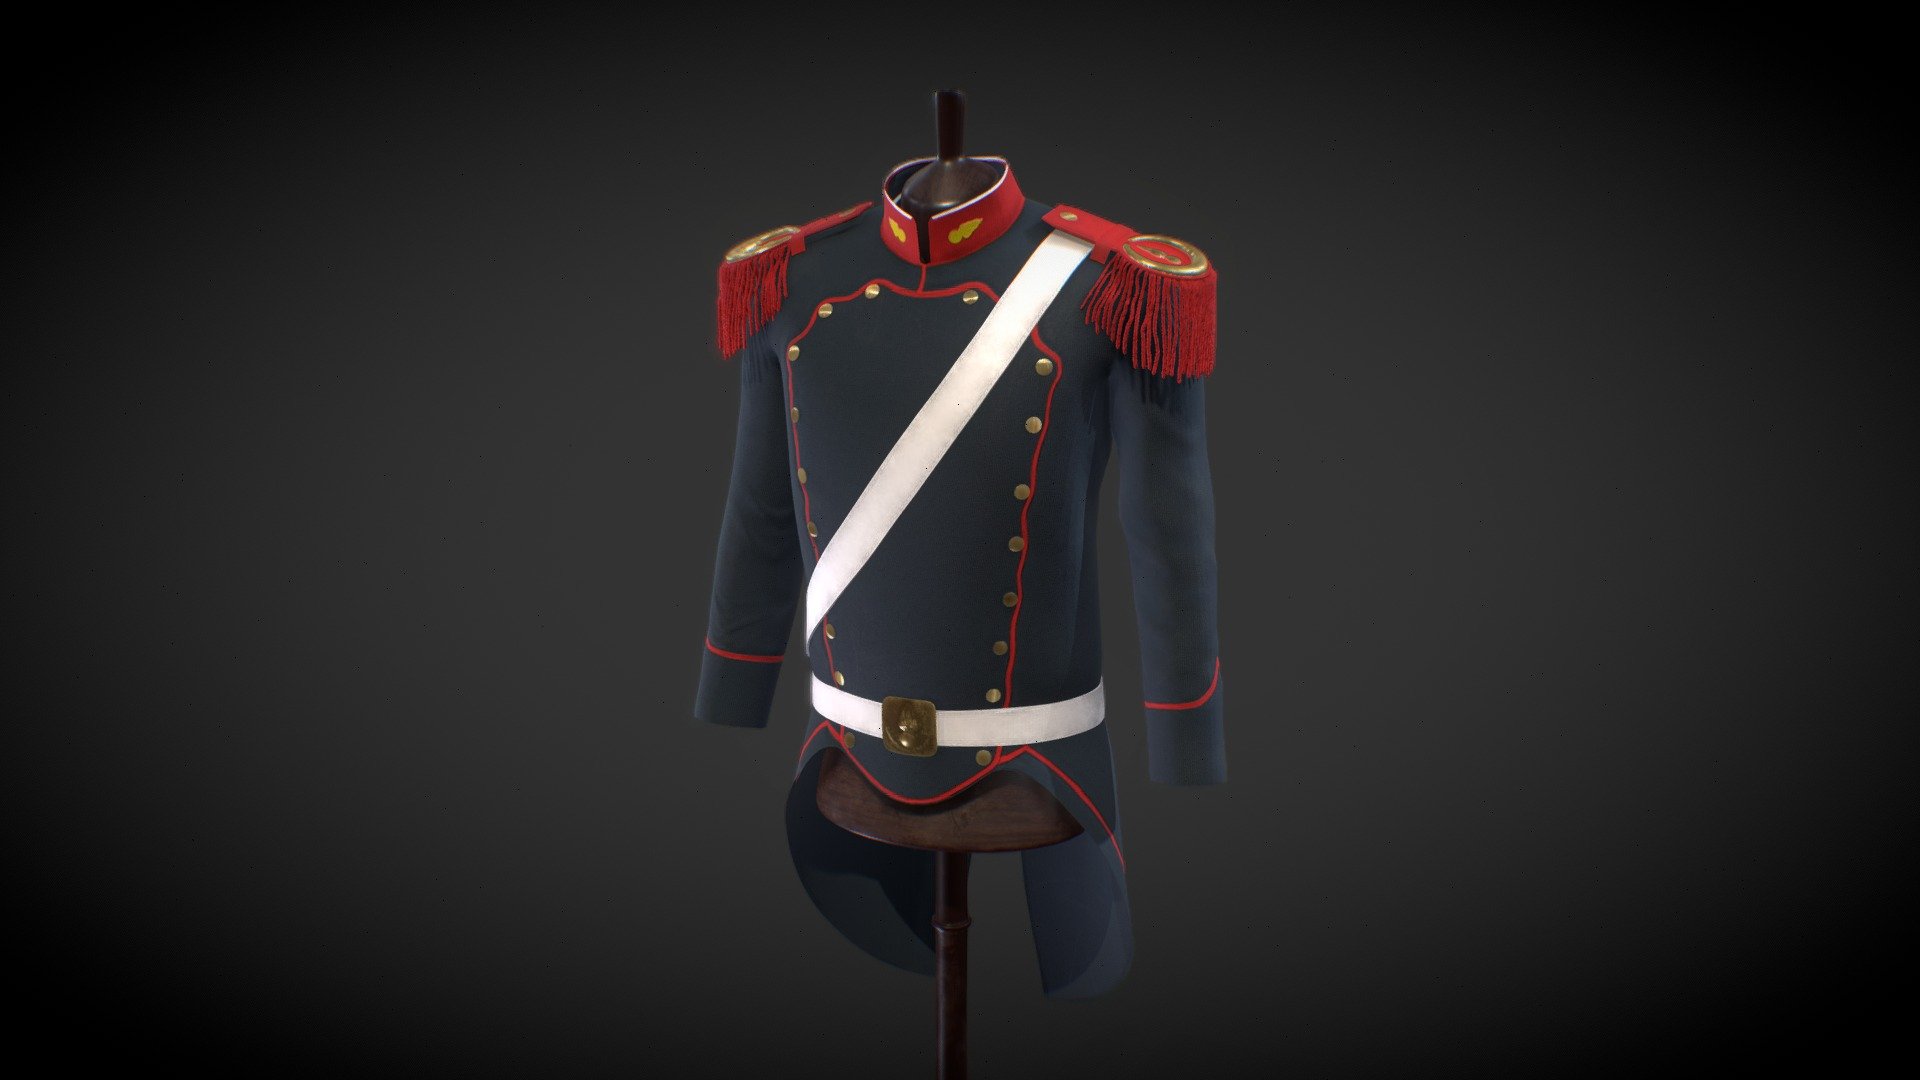 3D Low-Poly model of a Argentine Mounted Grenadier uniform.

The Regiment of Mounted Grenadiers (Spanish: Regimiento de Granaderos a Caballo) is the name of two Argentine Army regiments of two different time periods: a historic regiment that operated from 1812 to 1826, and a modern cavalry unit that was organized in 1903. 
The first Regiment of Mounted Grenadiers, formed in 1812, fought in the Argentine War of Independence under José de San Martín, and the Cisplatine War, subsequently becoming the Presidential bodyguard in 1825.
The second Regiment of Mounted Grenadiers was formed in 1903, and serves as the national ceremonial unit 3d model